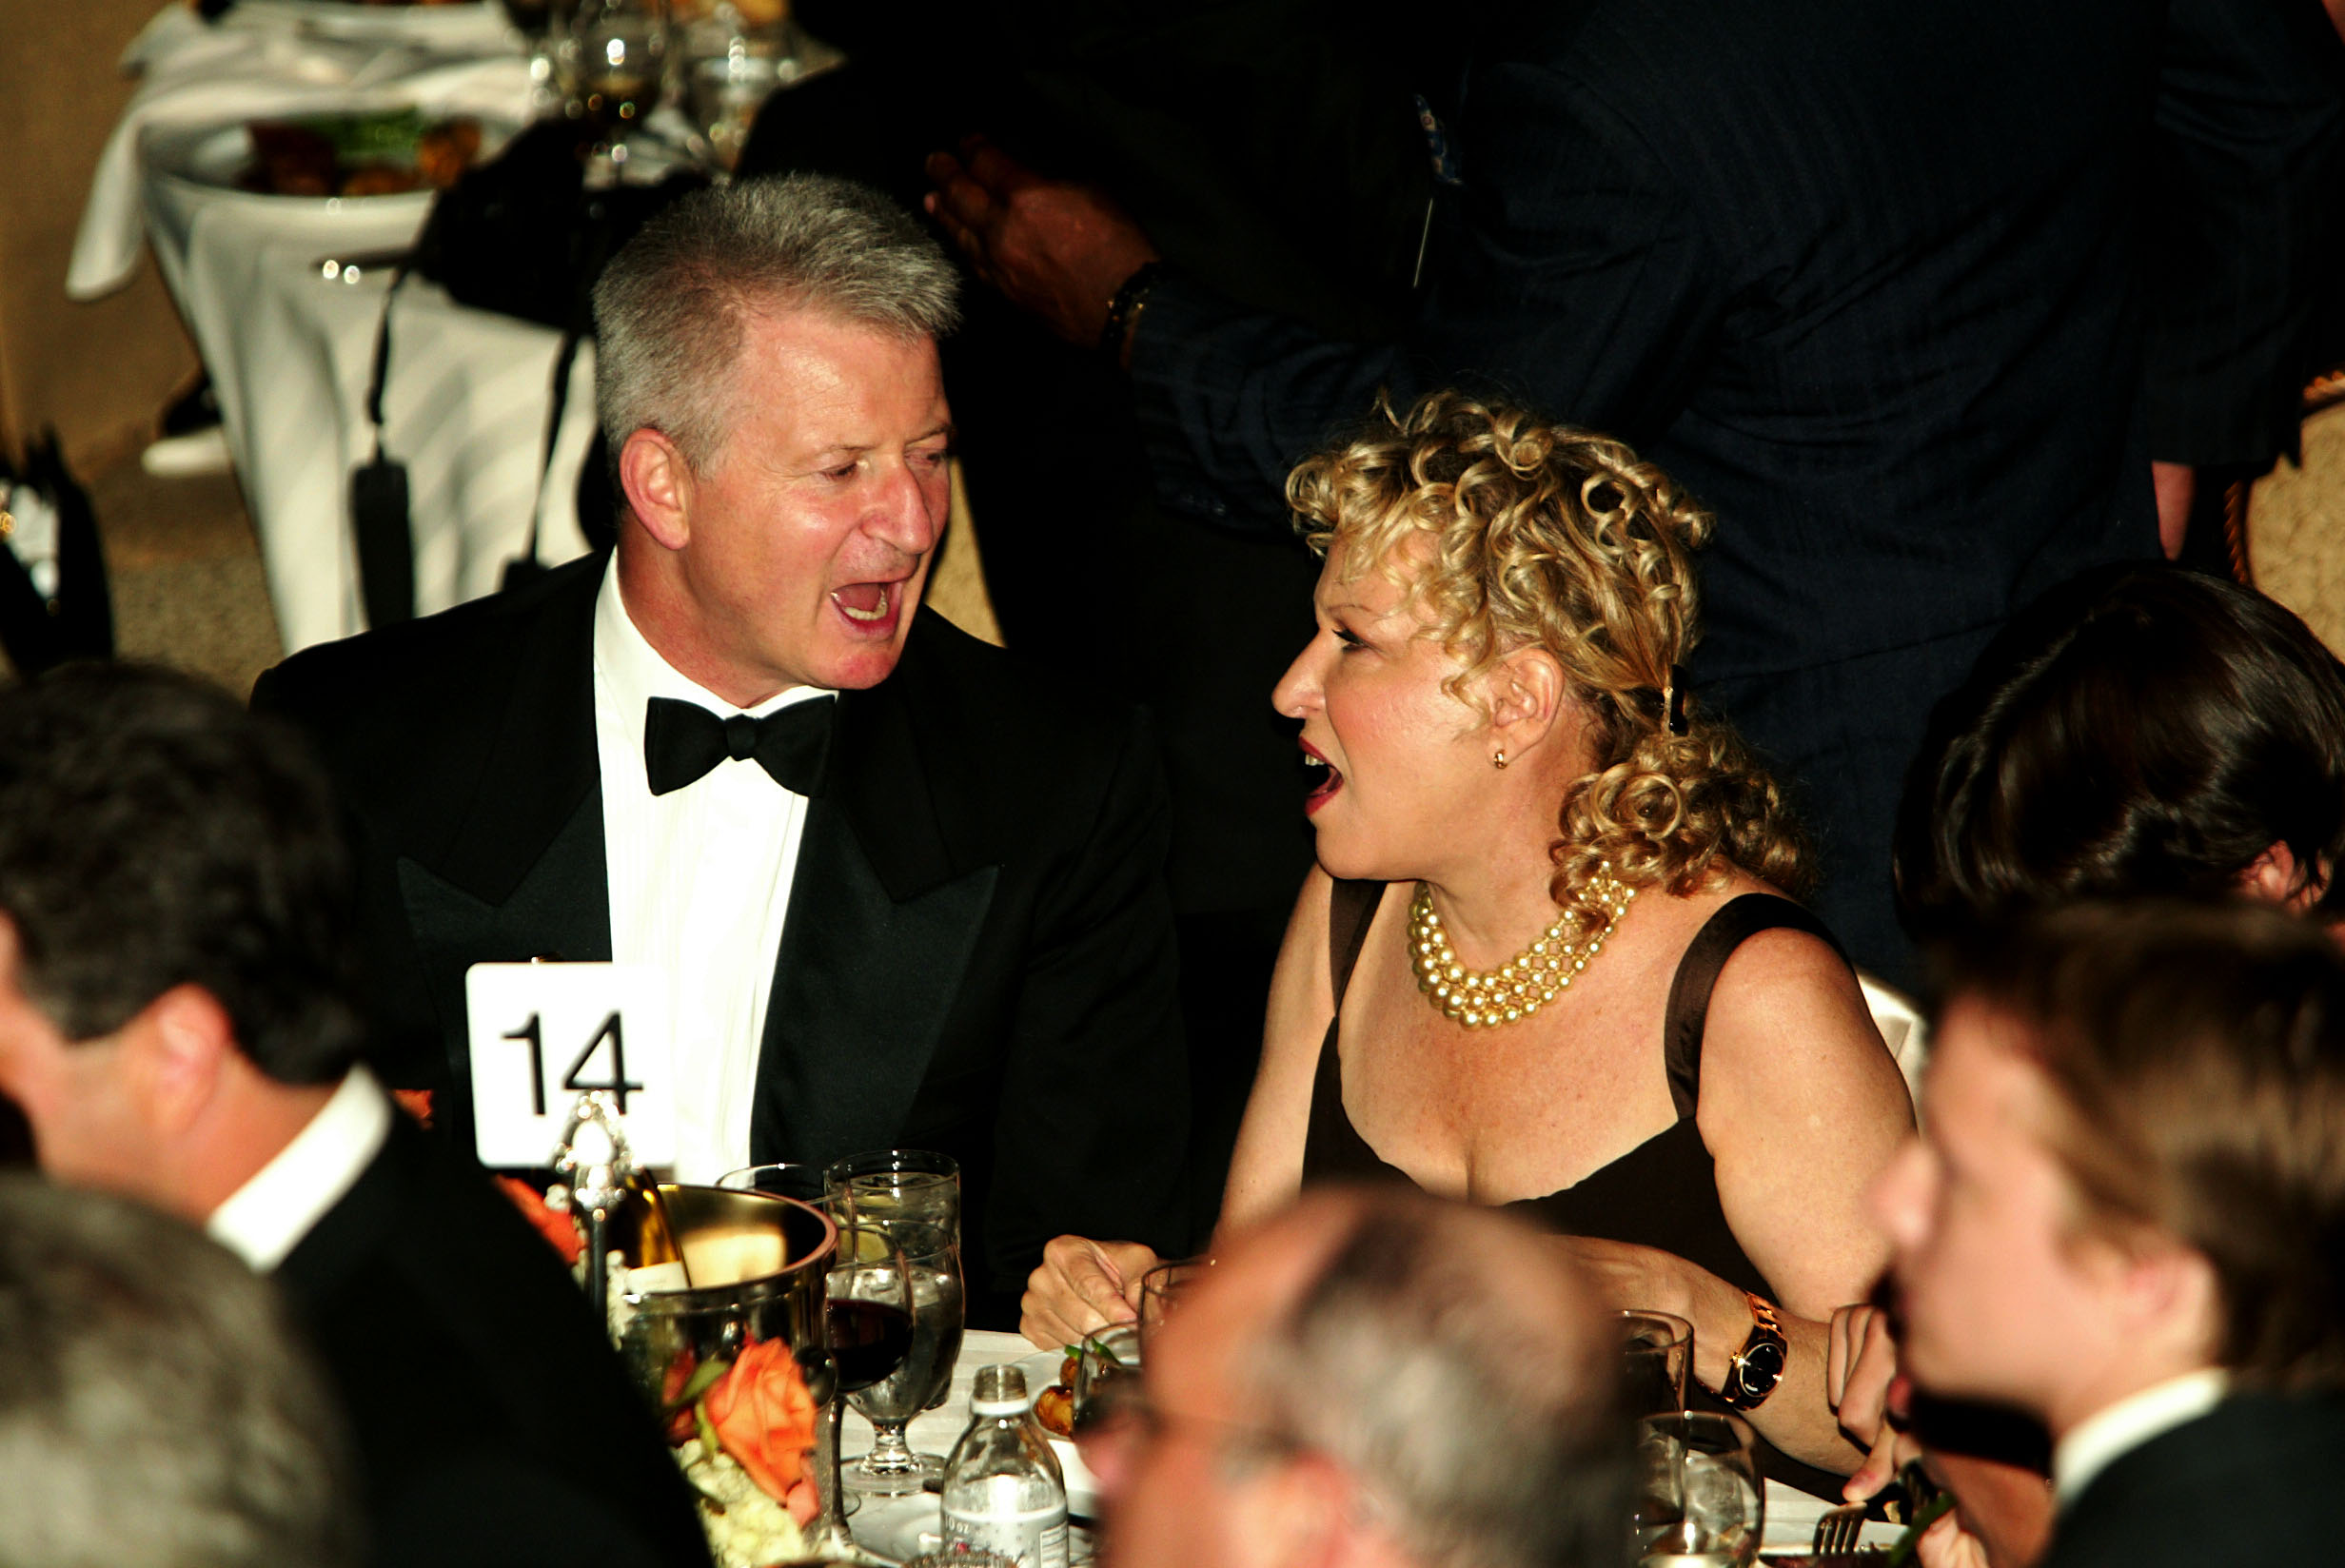 Bette Midler and Martin von Haselberg in New York in 2002 | Source: Getty Images